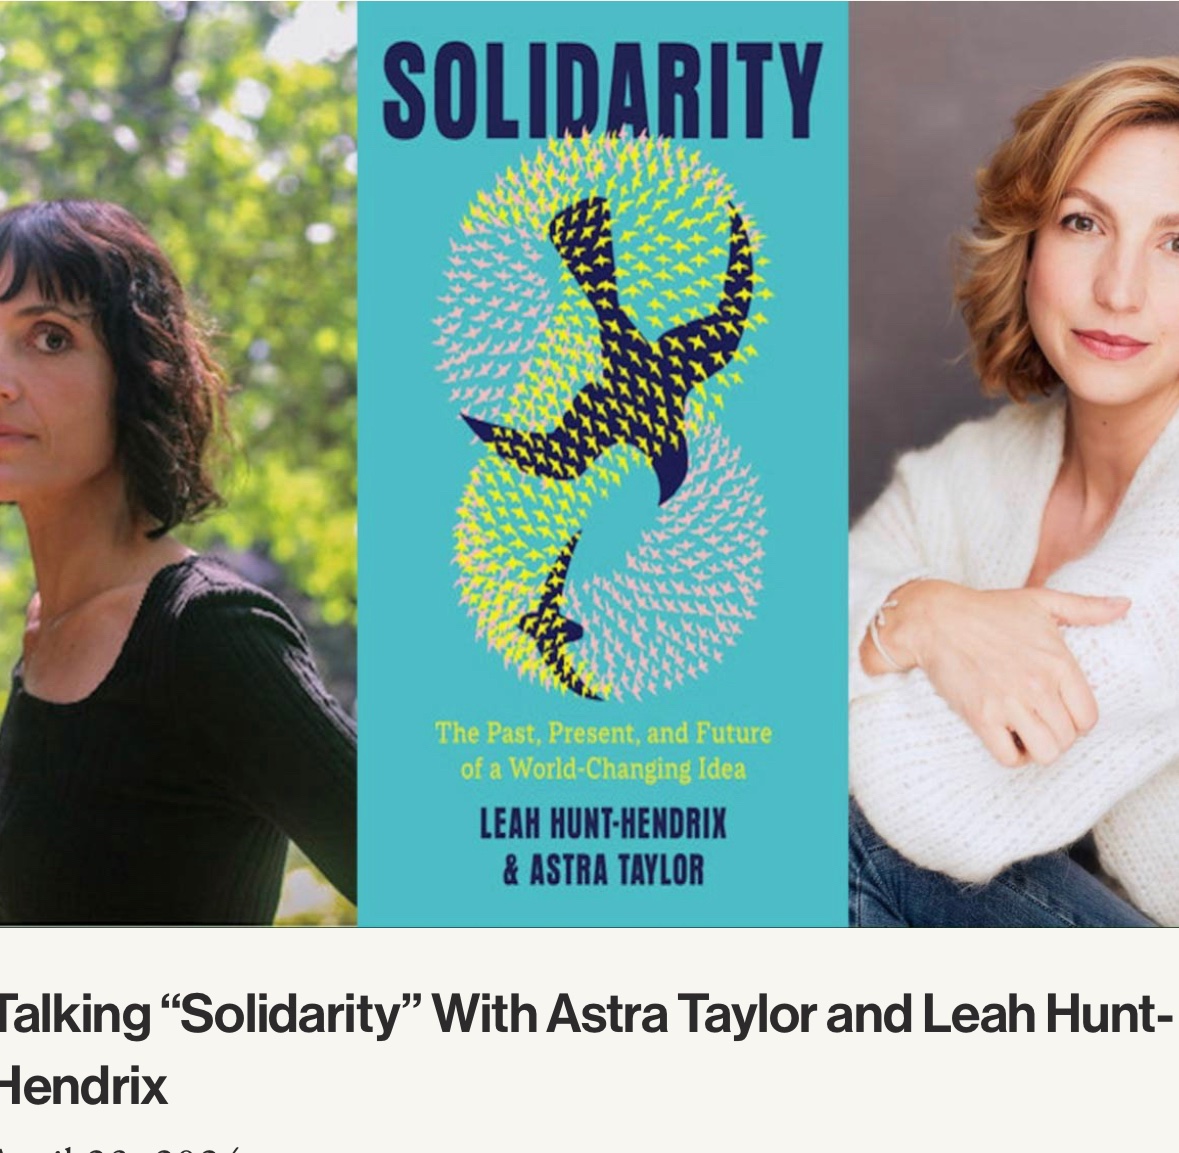 Please read my latest interview for The Nation which is Astra Taylor and Leah-Hunt Hendrix and concerns their new book, Solidarity: danielsteinmetzjenkins.squarespace.com/interviews